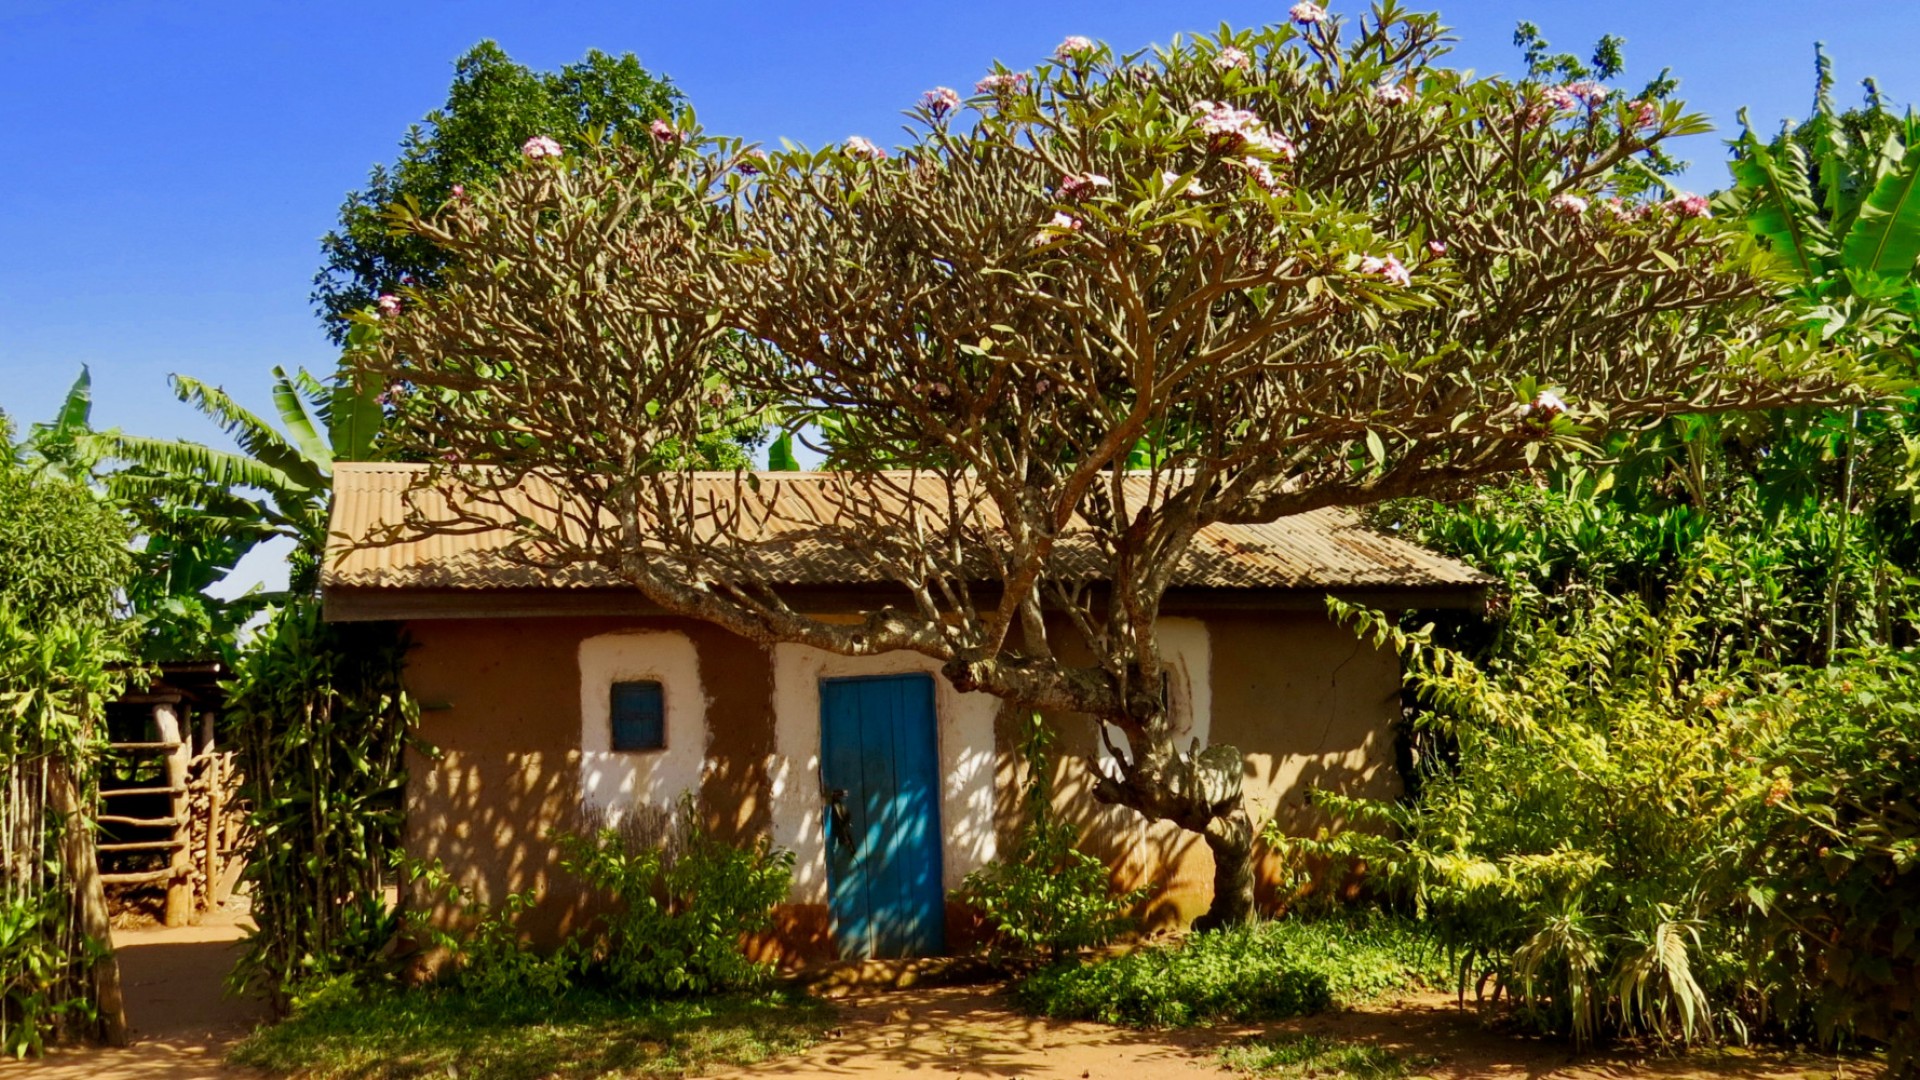 small home with a prominent blue door in Rwanda countryside